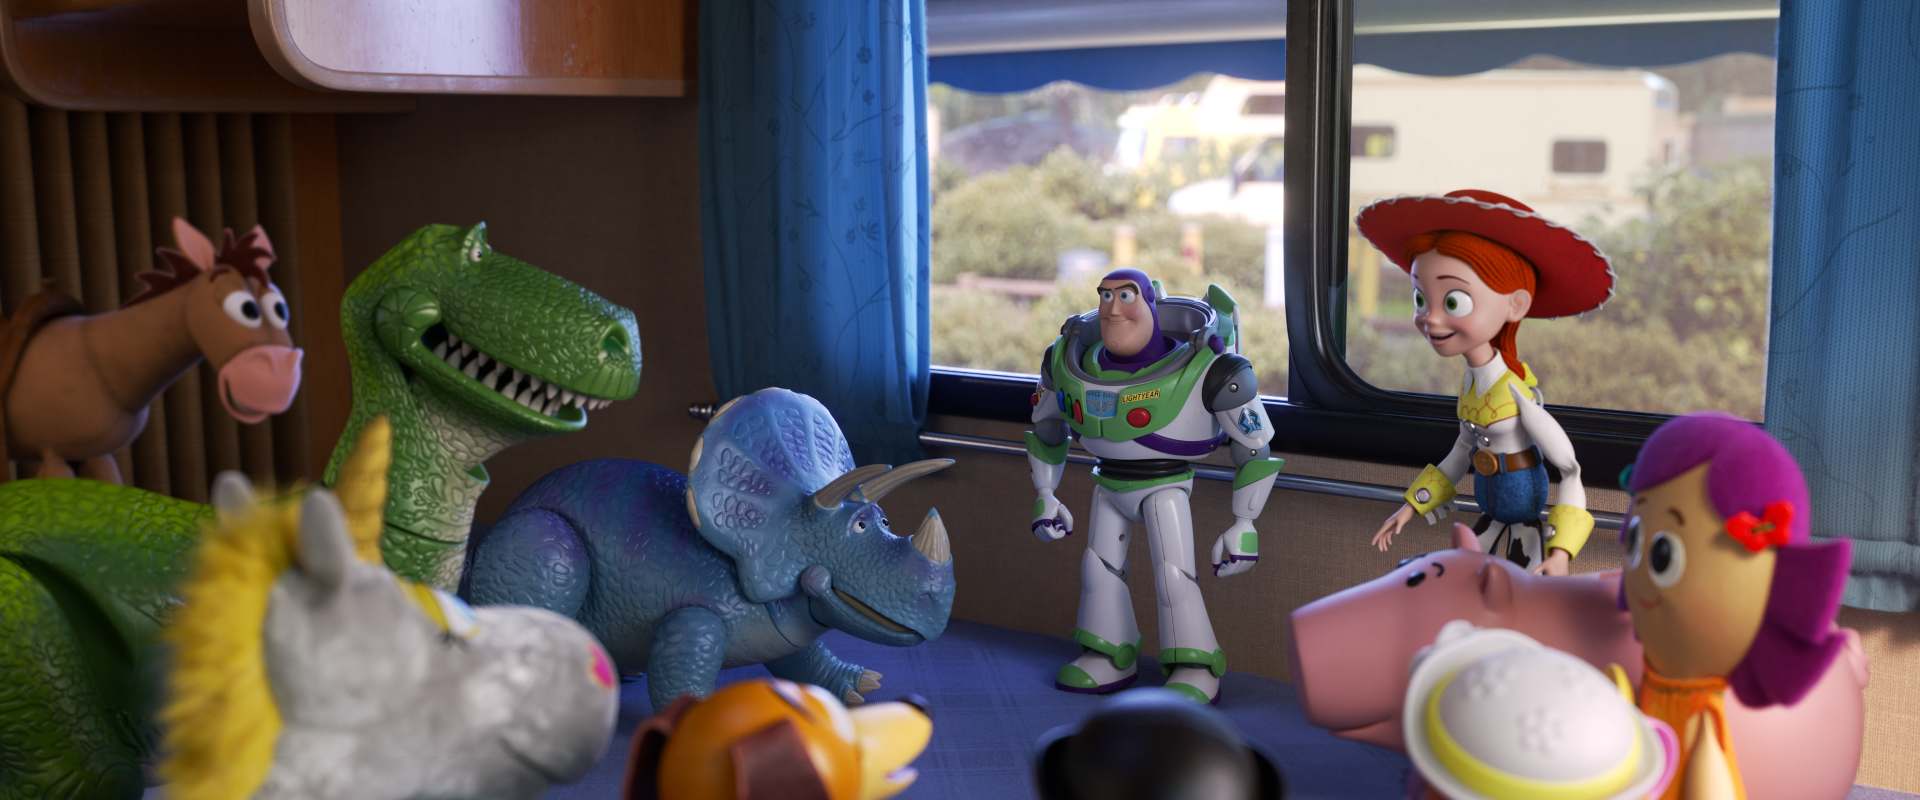 Toy Story 4 background 2